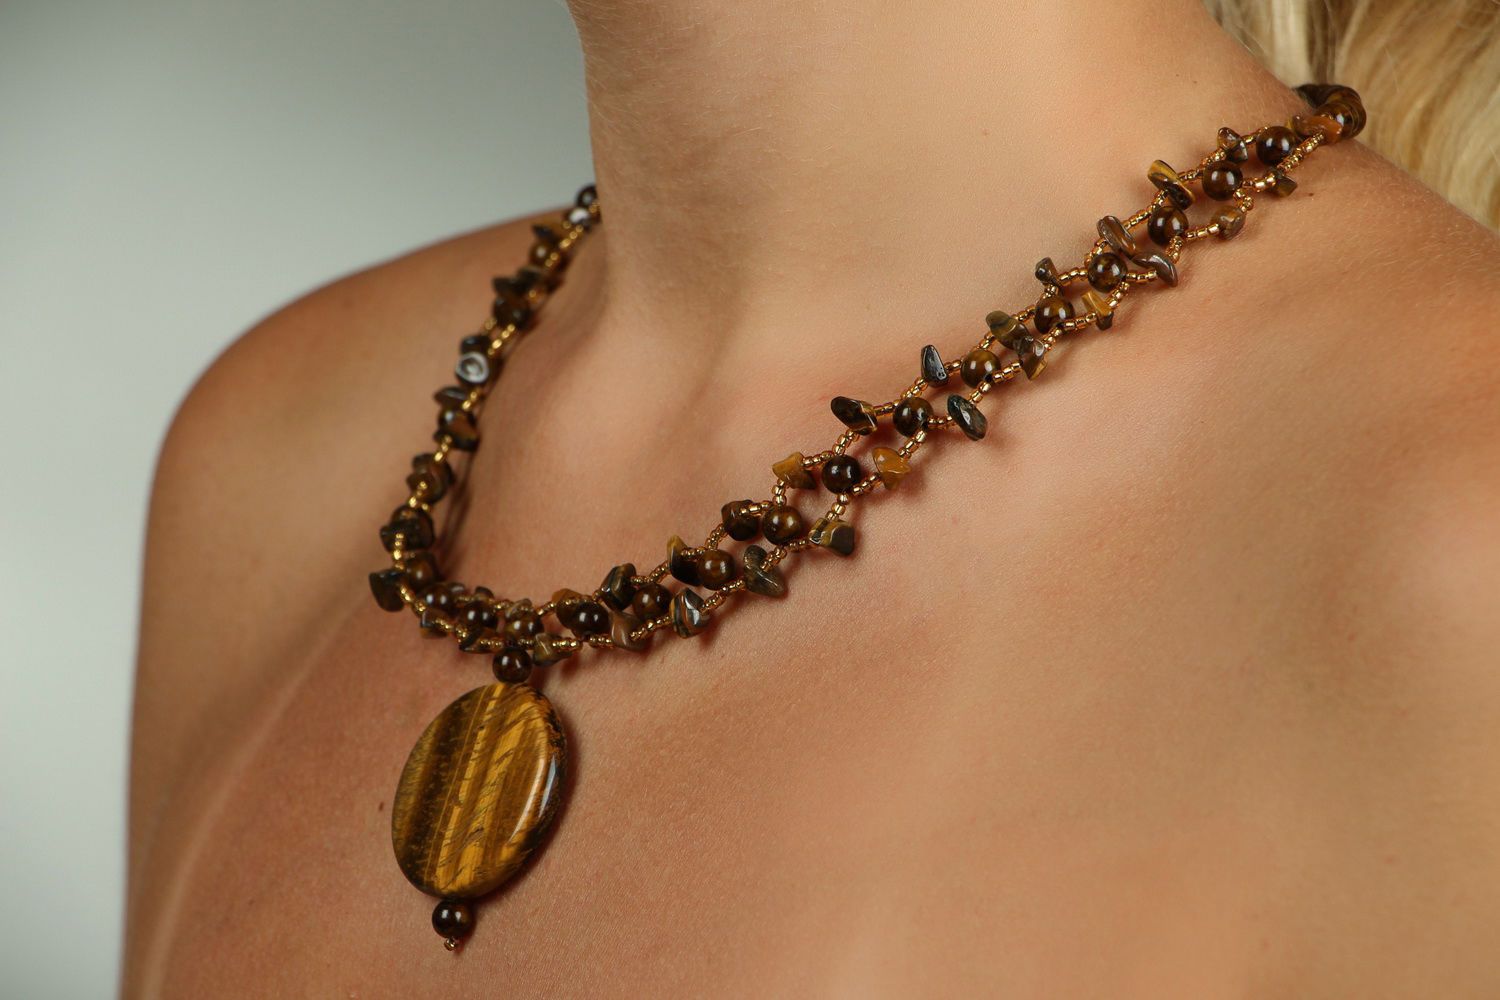 Necklace made of beads and tiger's eye stone photo 5